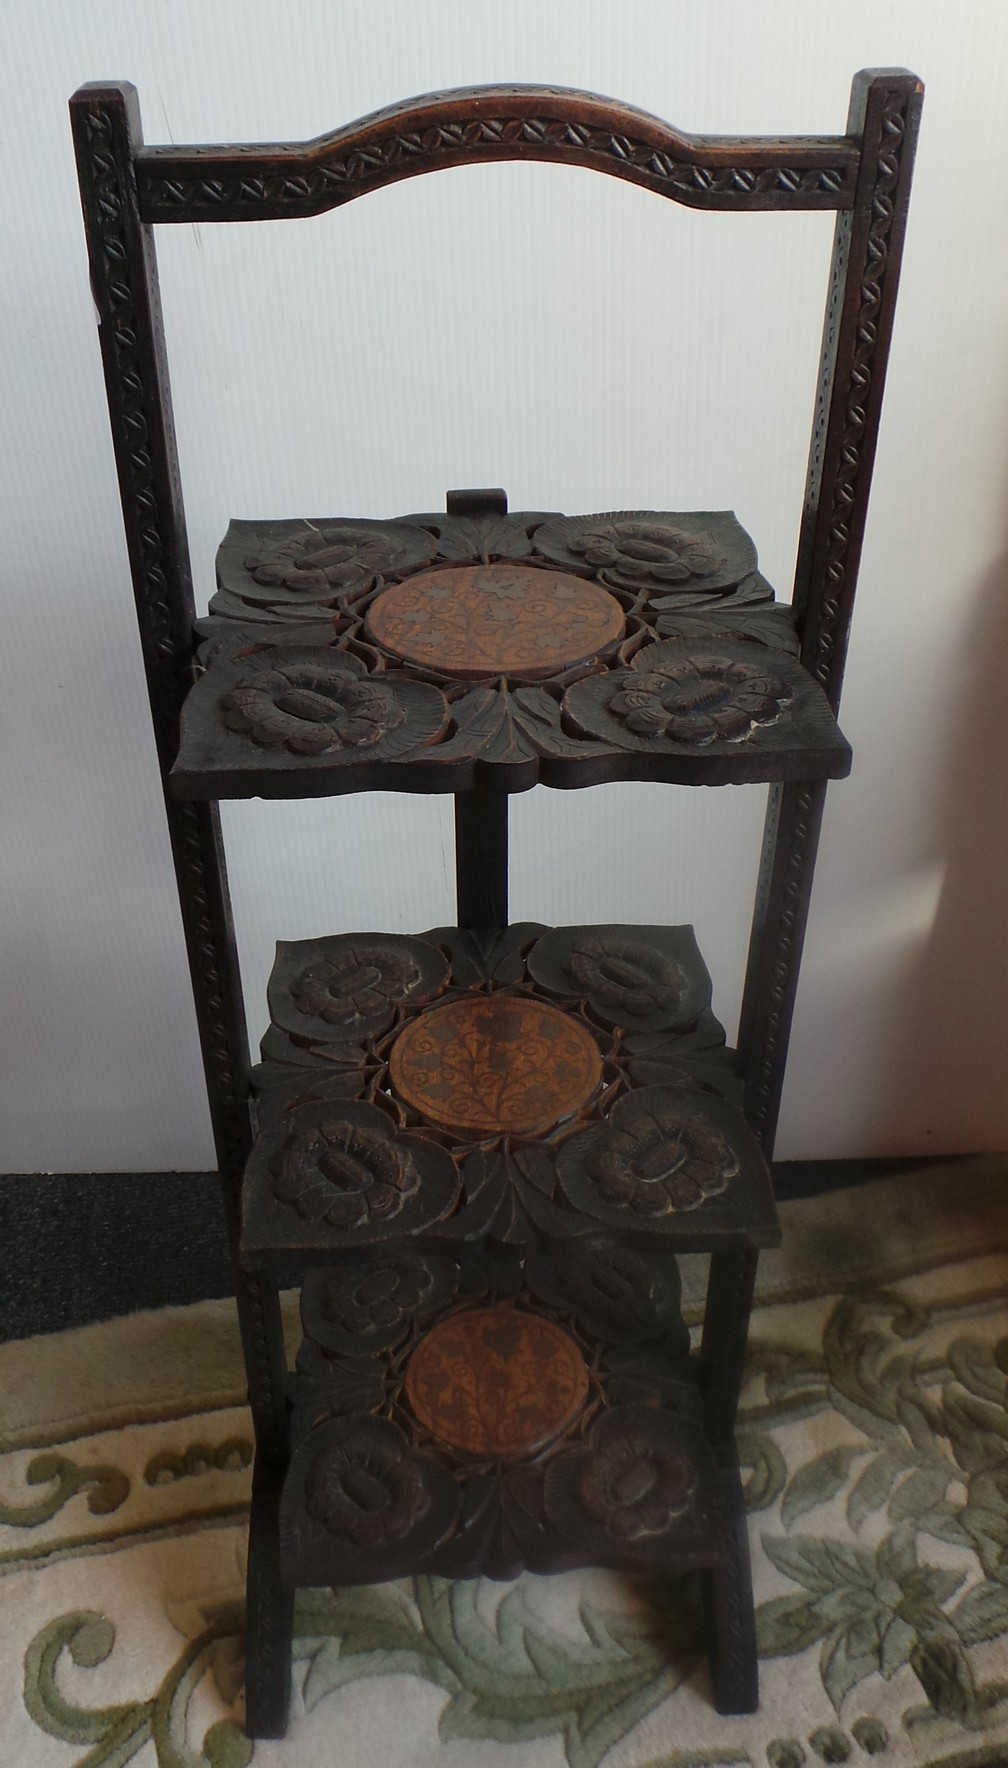 Carved 3 tier cake stand